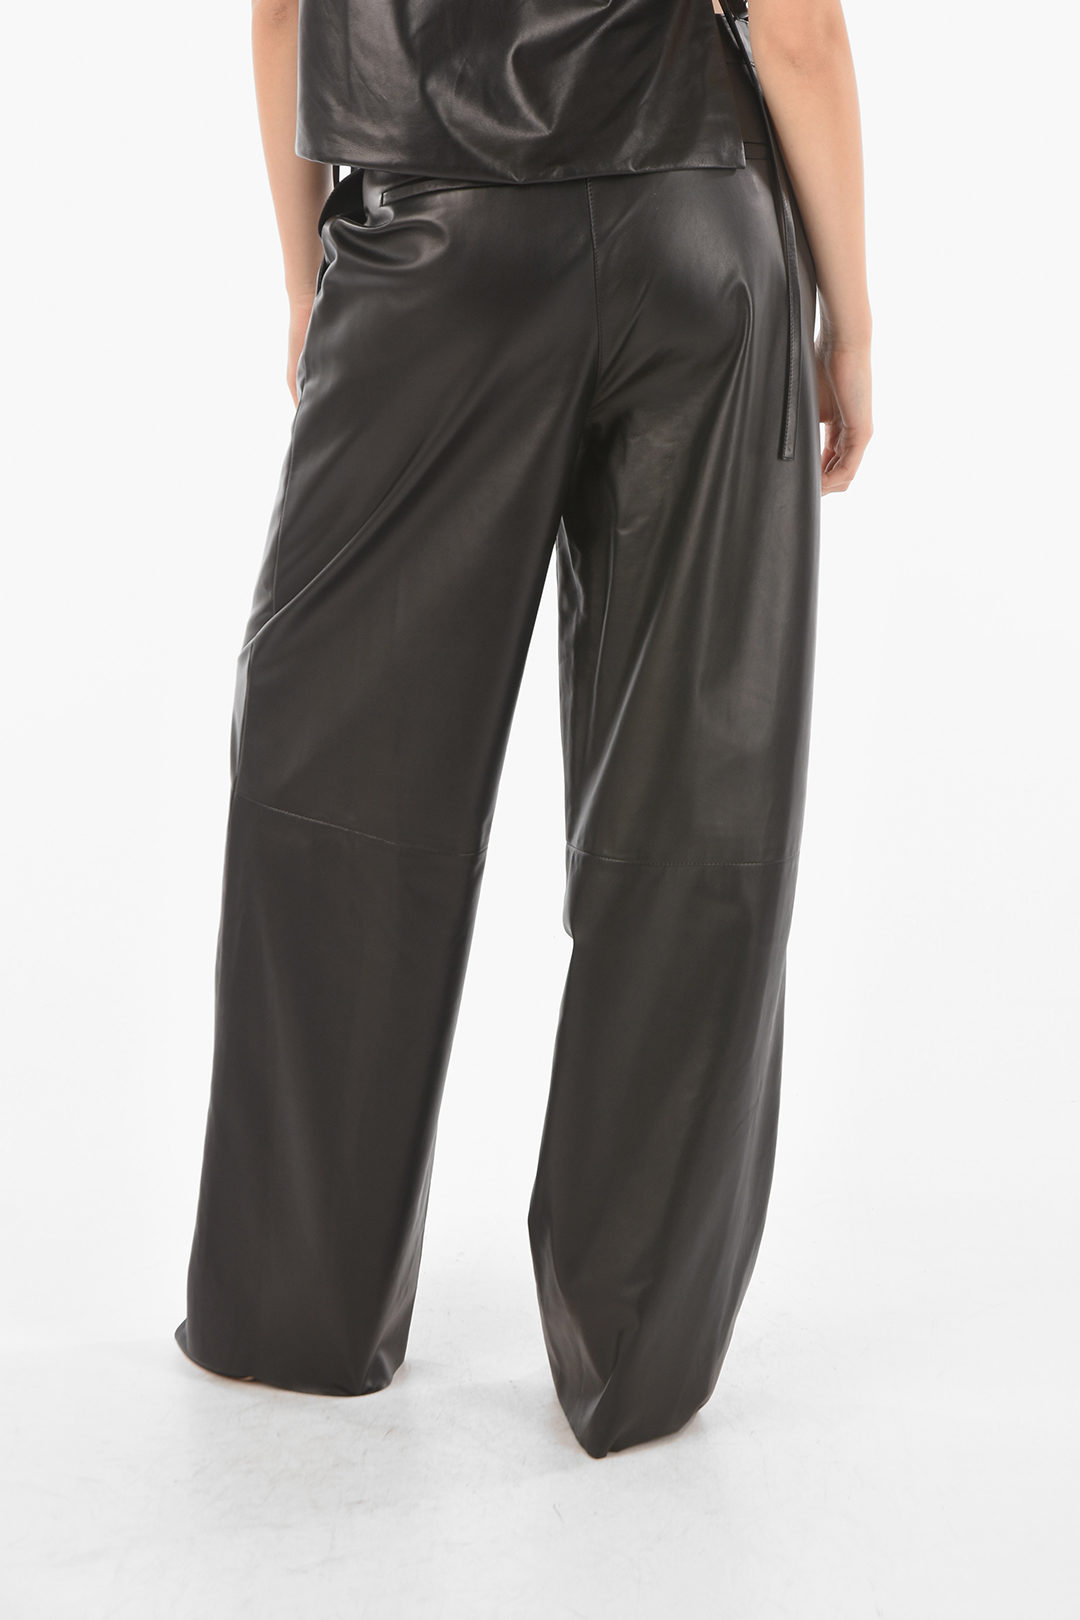 DROMe Soft Leather Baggy Pants with Visible Stitchings women - Glamood ...